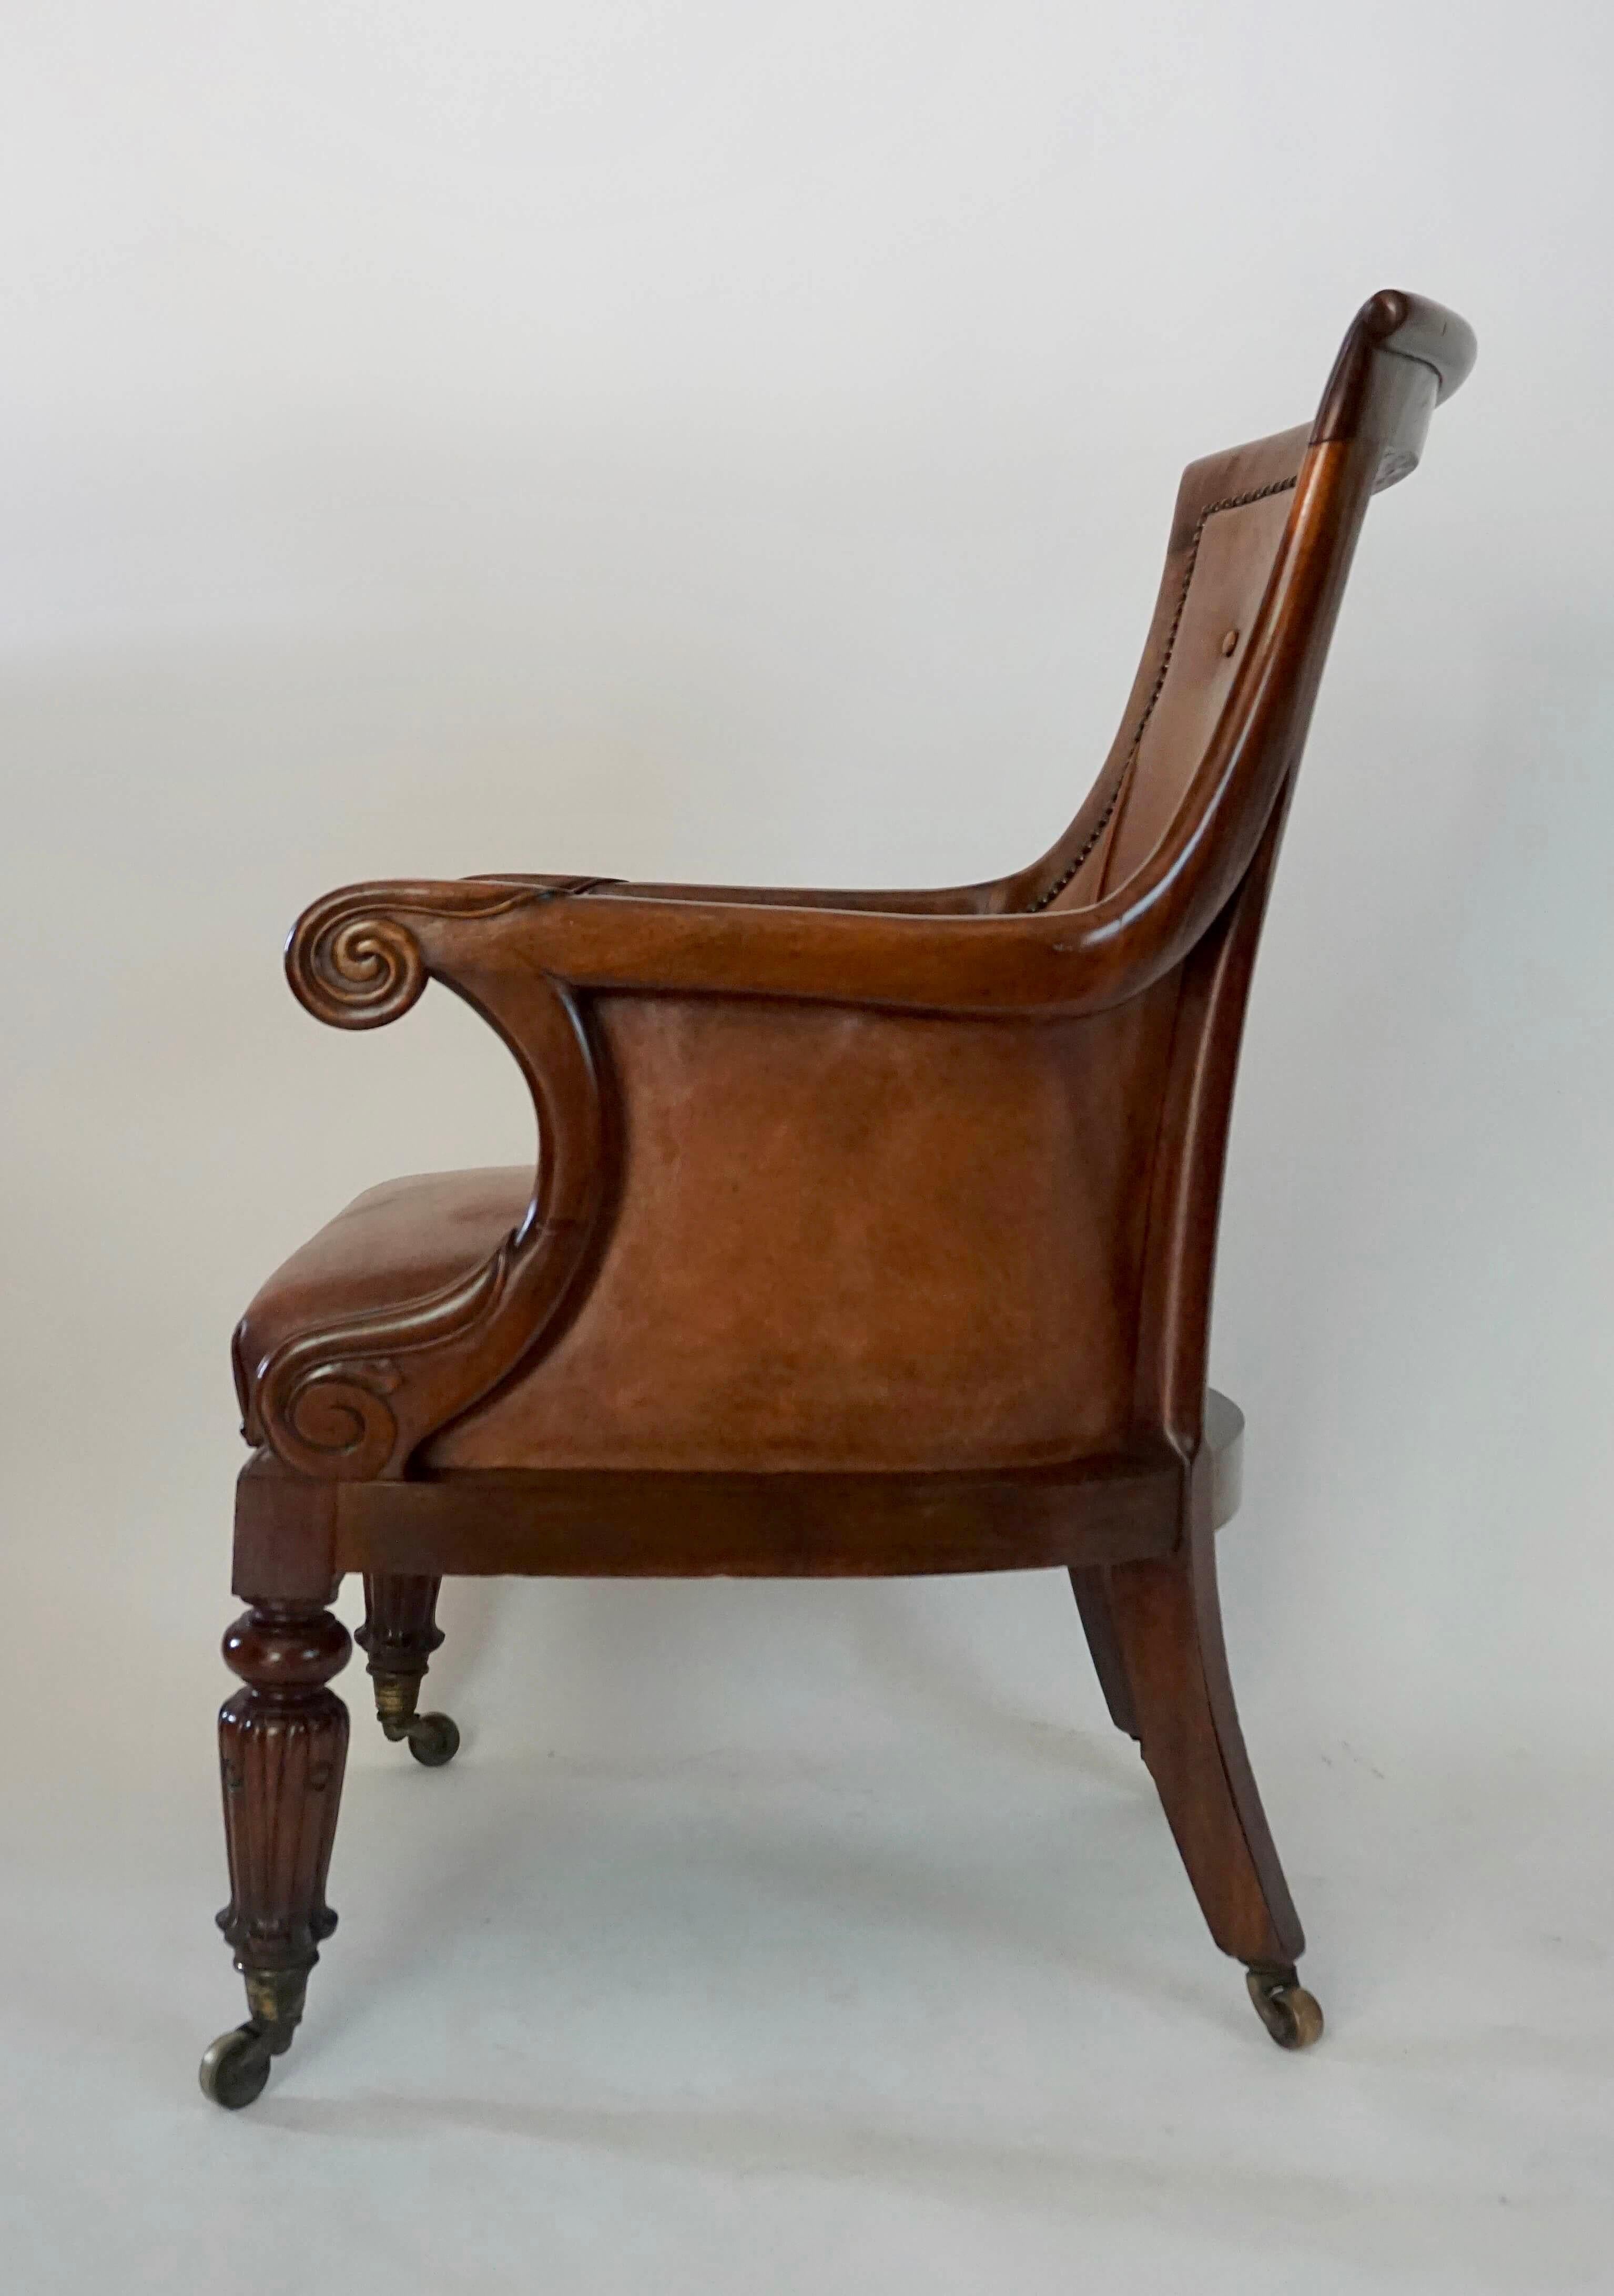 Carved English Regency William IV Mahogany and Leather Bergère Armchair, circa 1835